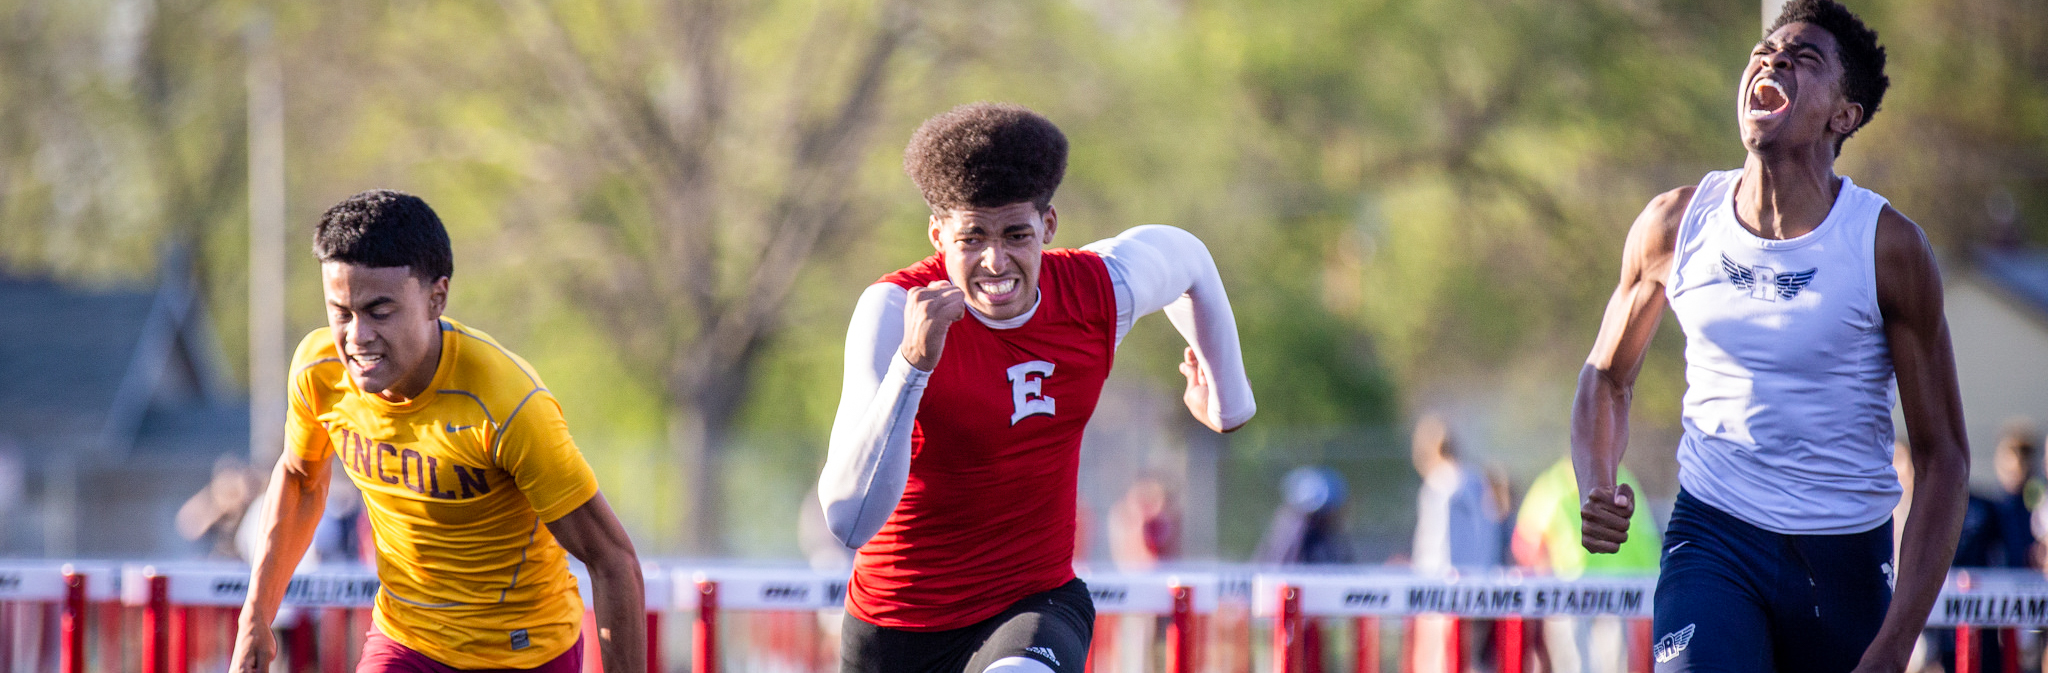 Five DMPS High Schools Head to State Track & Field Meet